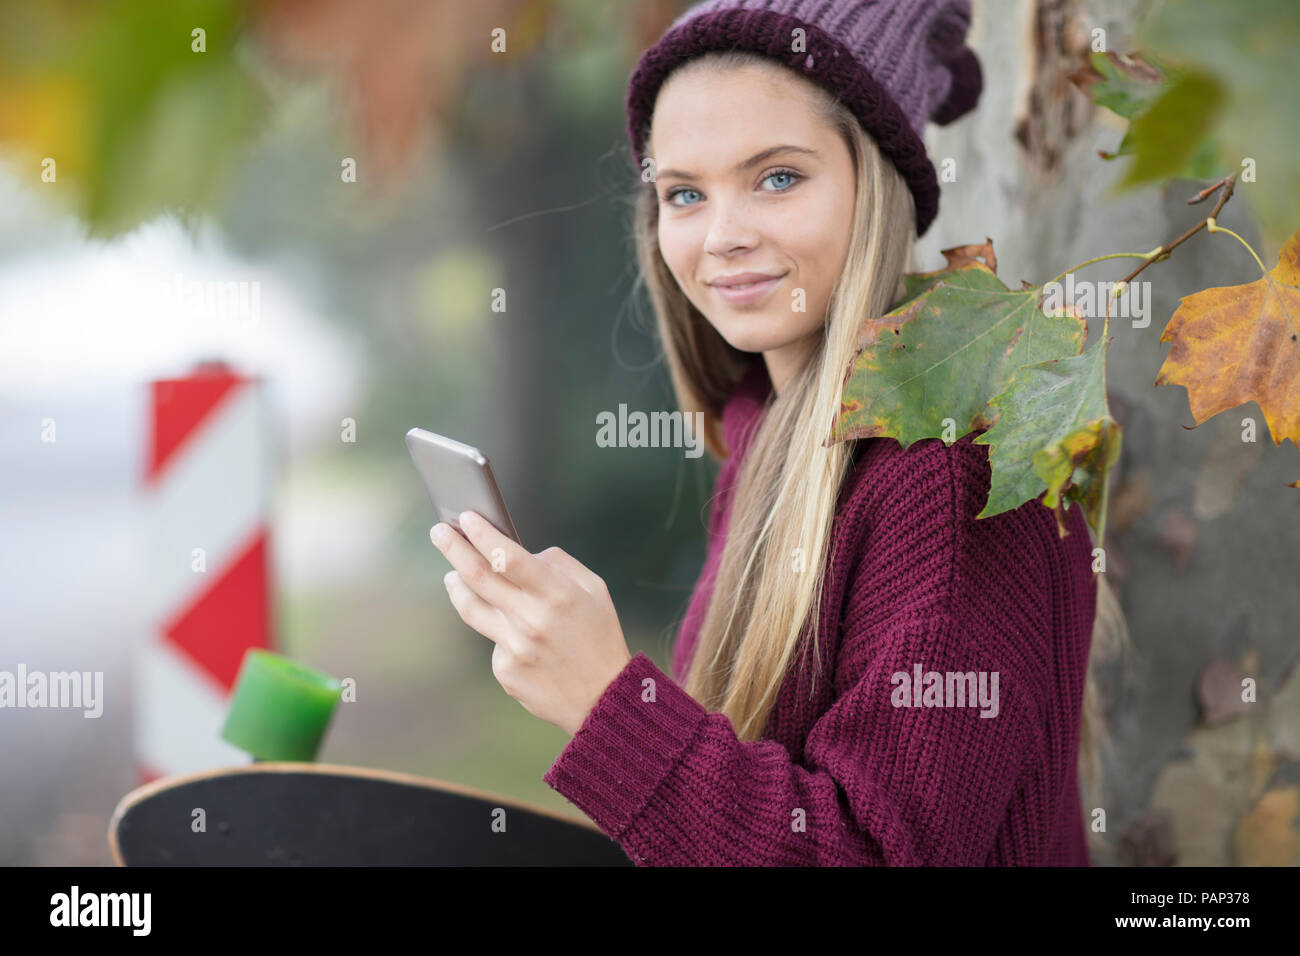 Portrait of smiling teenage girl with cell phone and skateboard Stock Photo